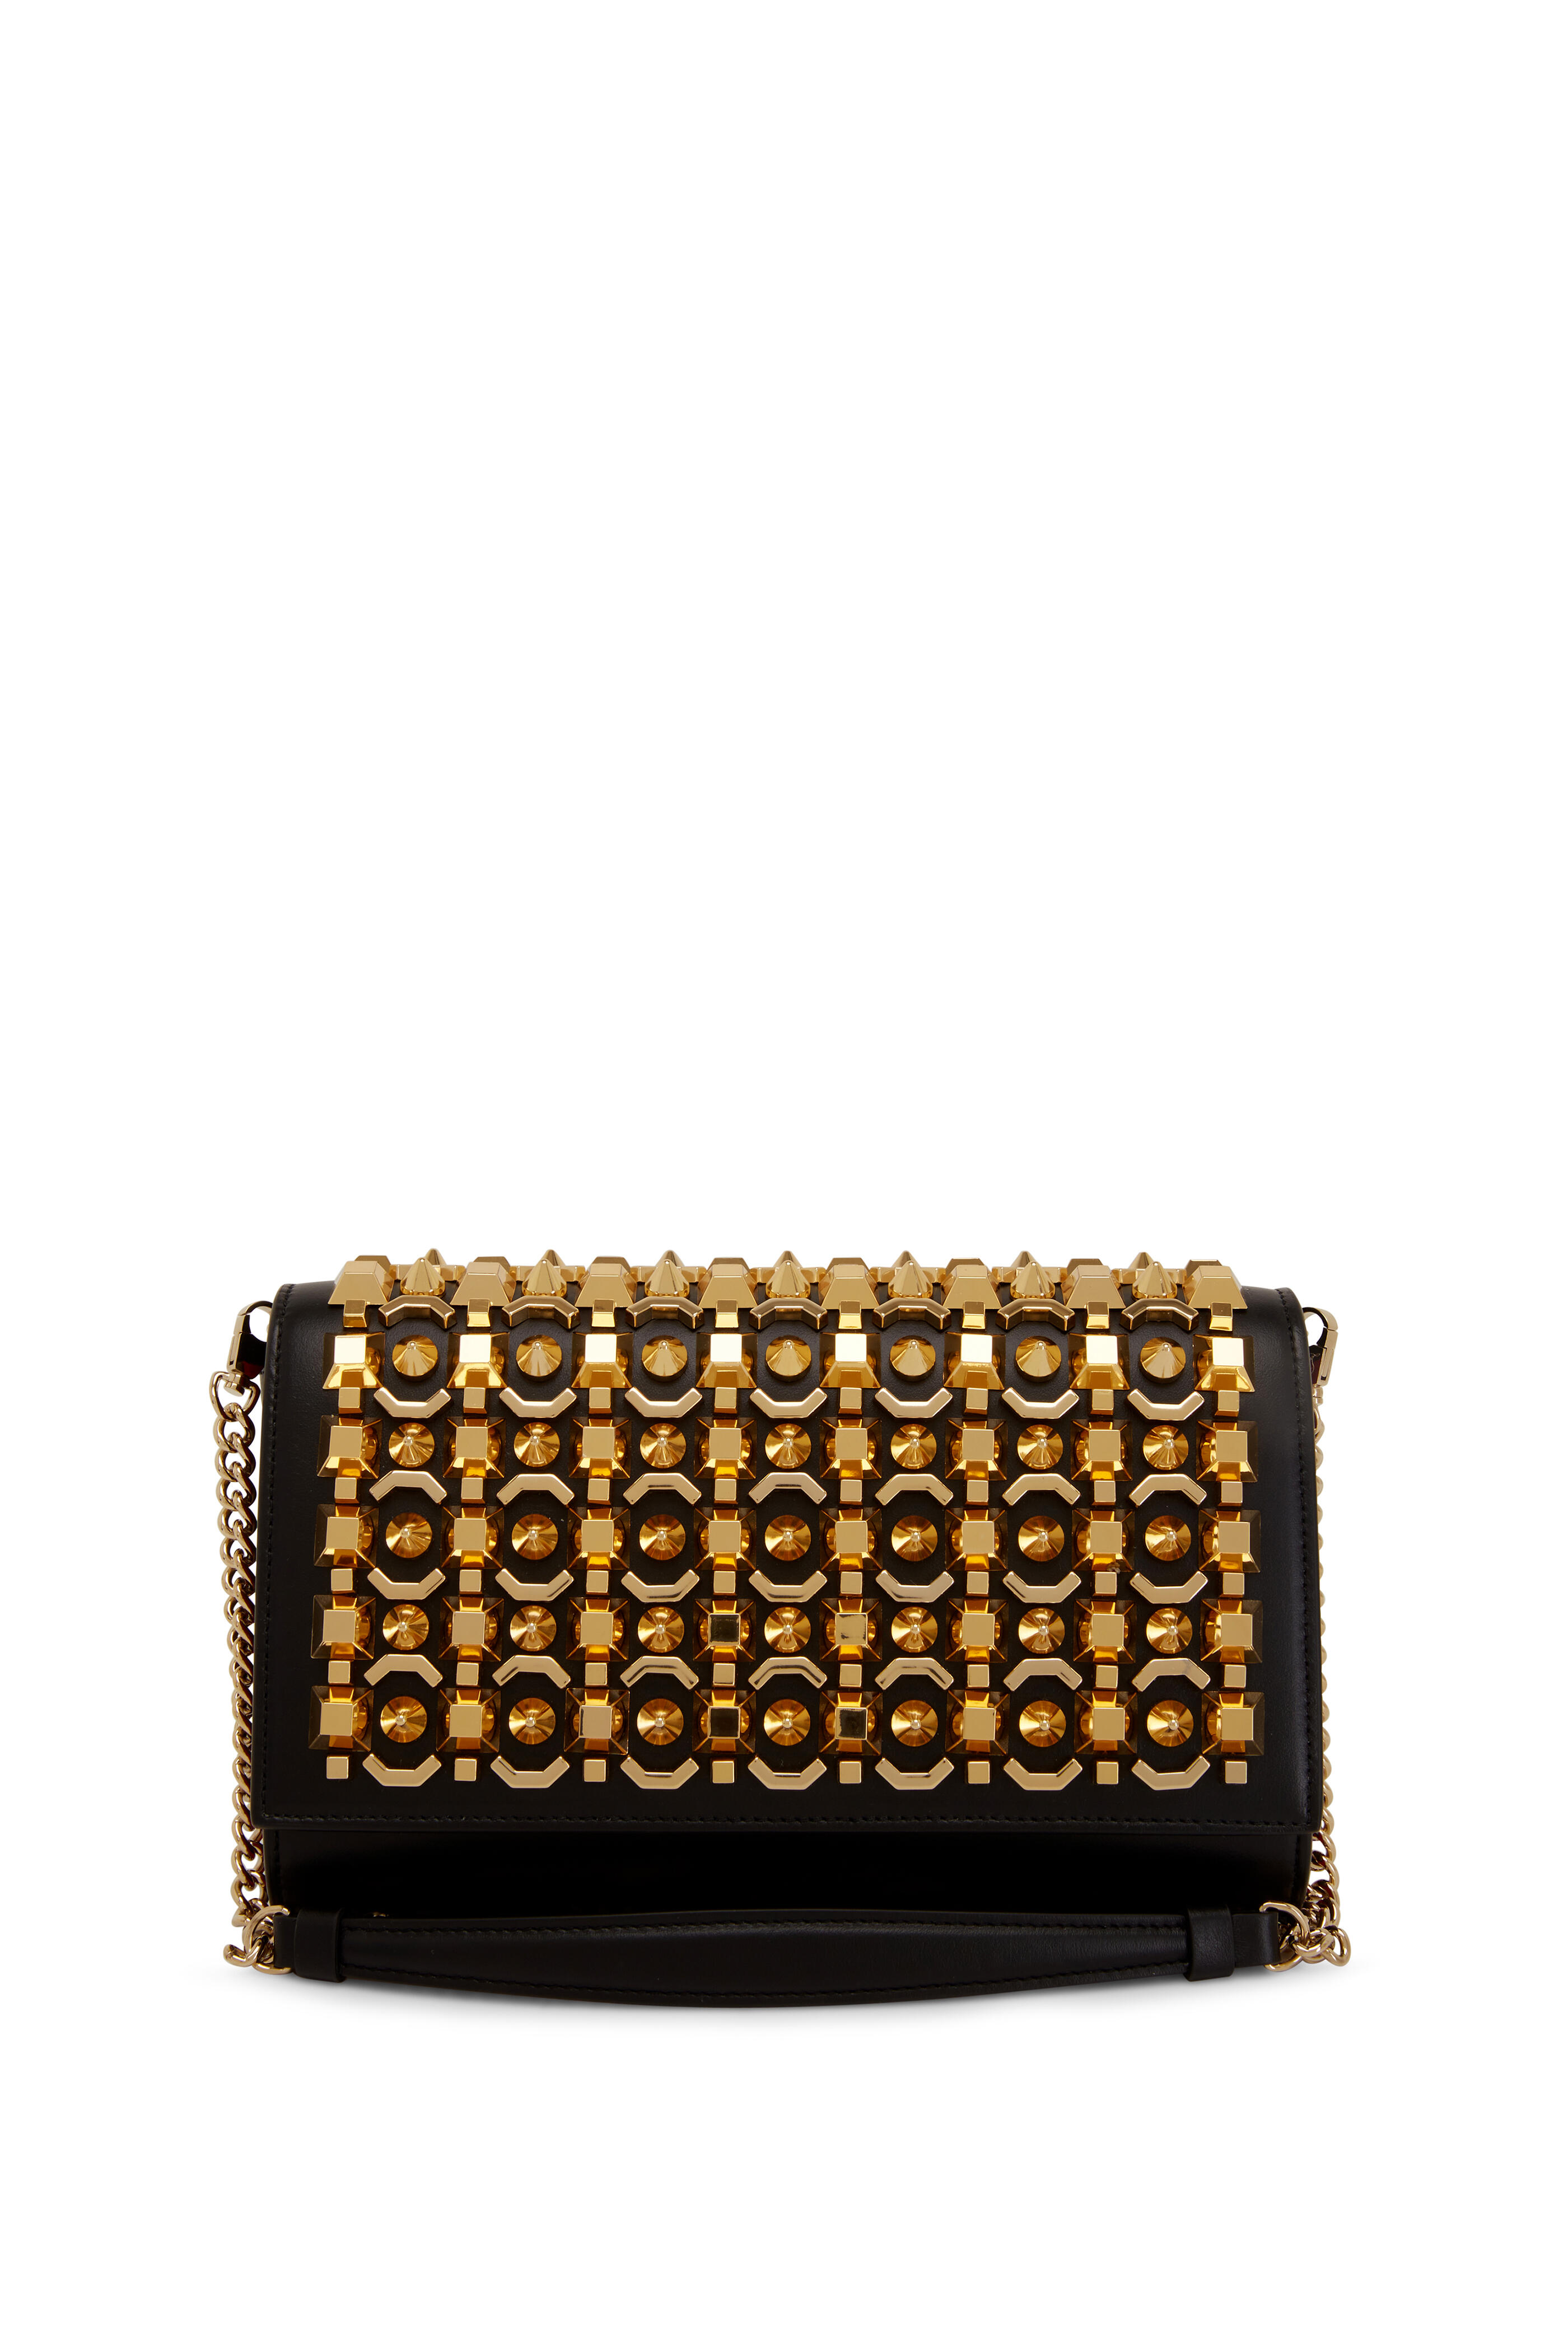 Paloma Clutch Spiked Holographic Leather